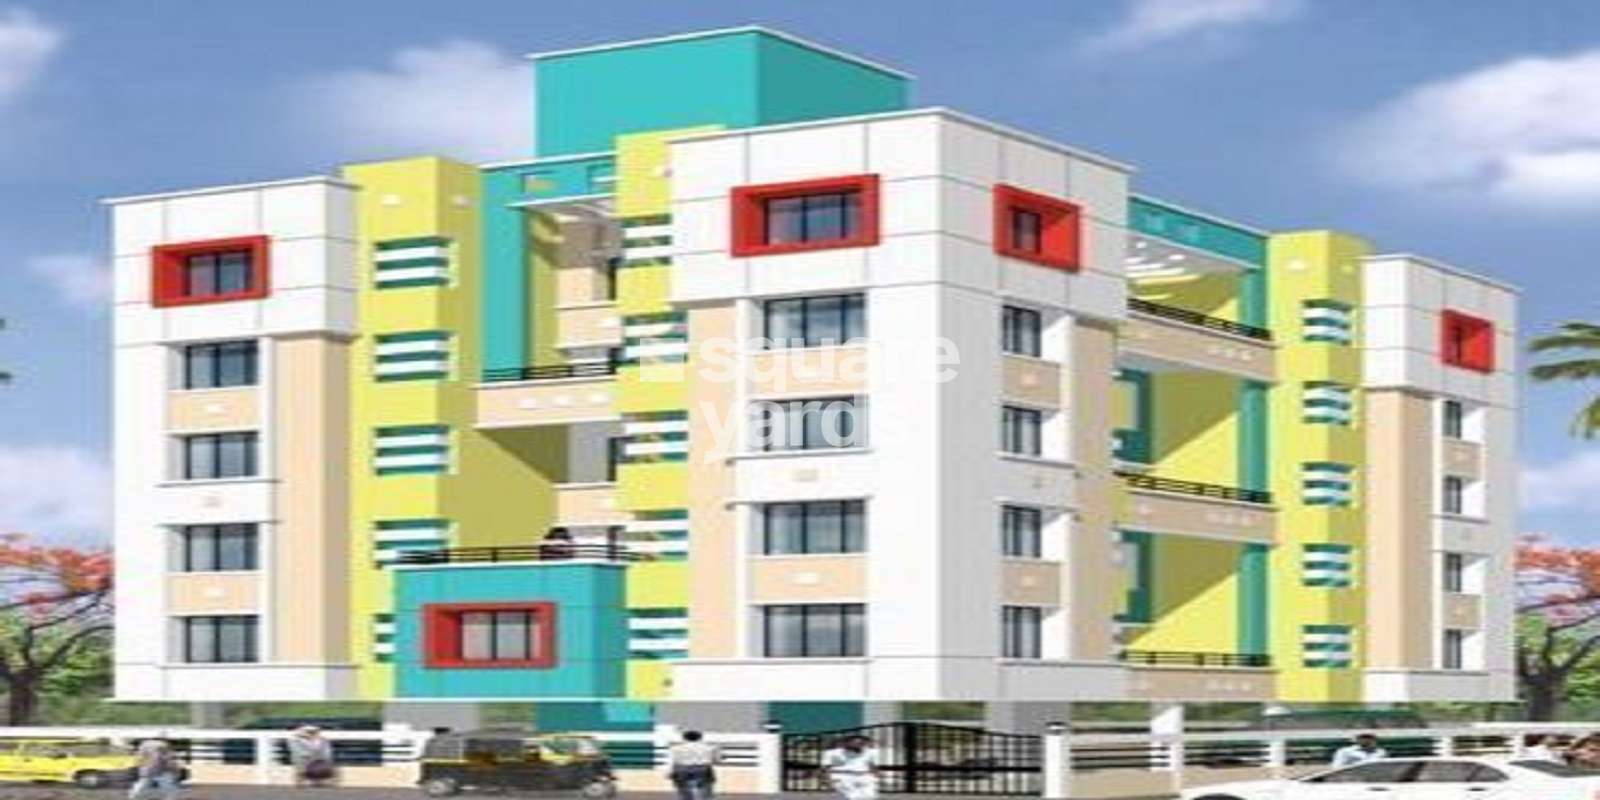 Ganesh Terrace Apartments Cover Image